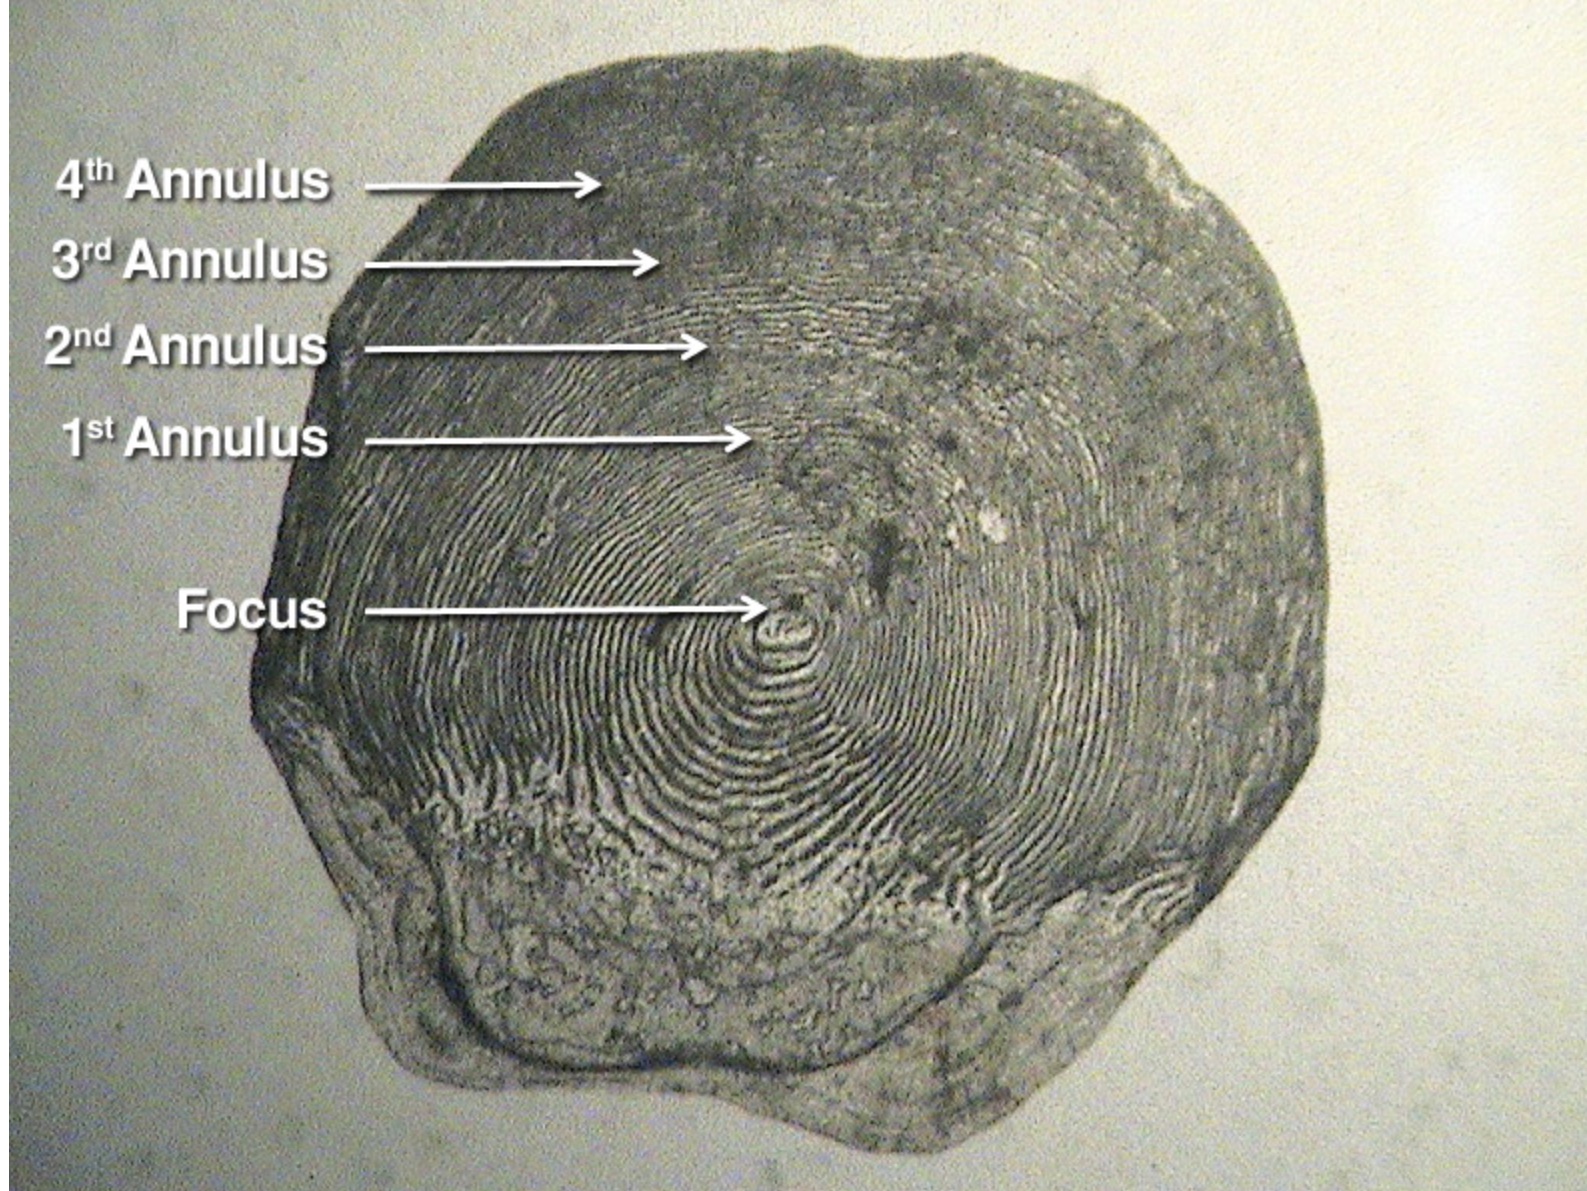 fish-scale-in-shale-fossil-id-the-fossil-forum